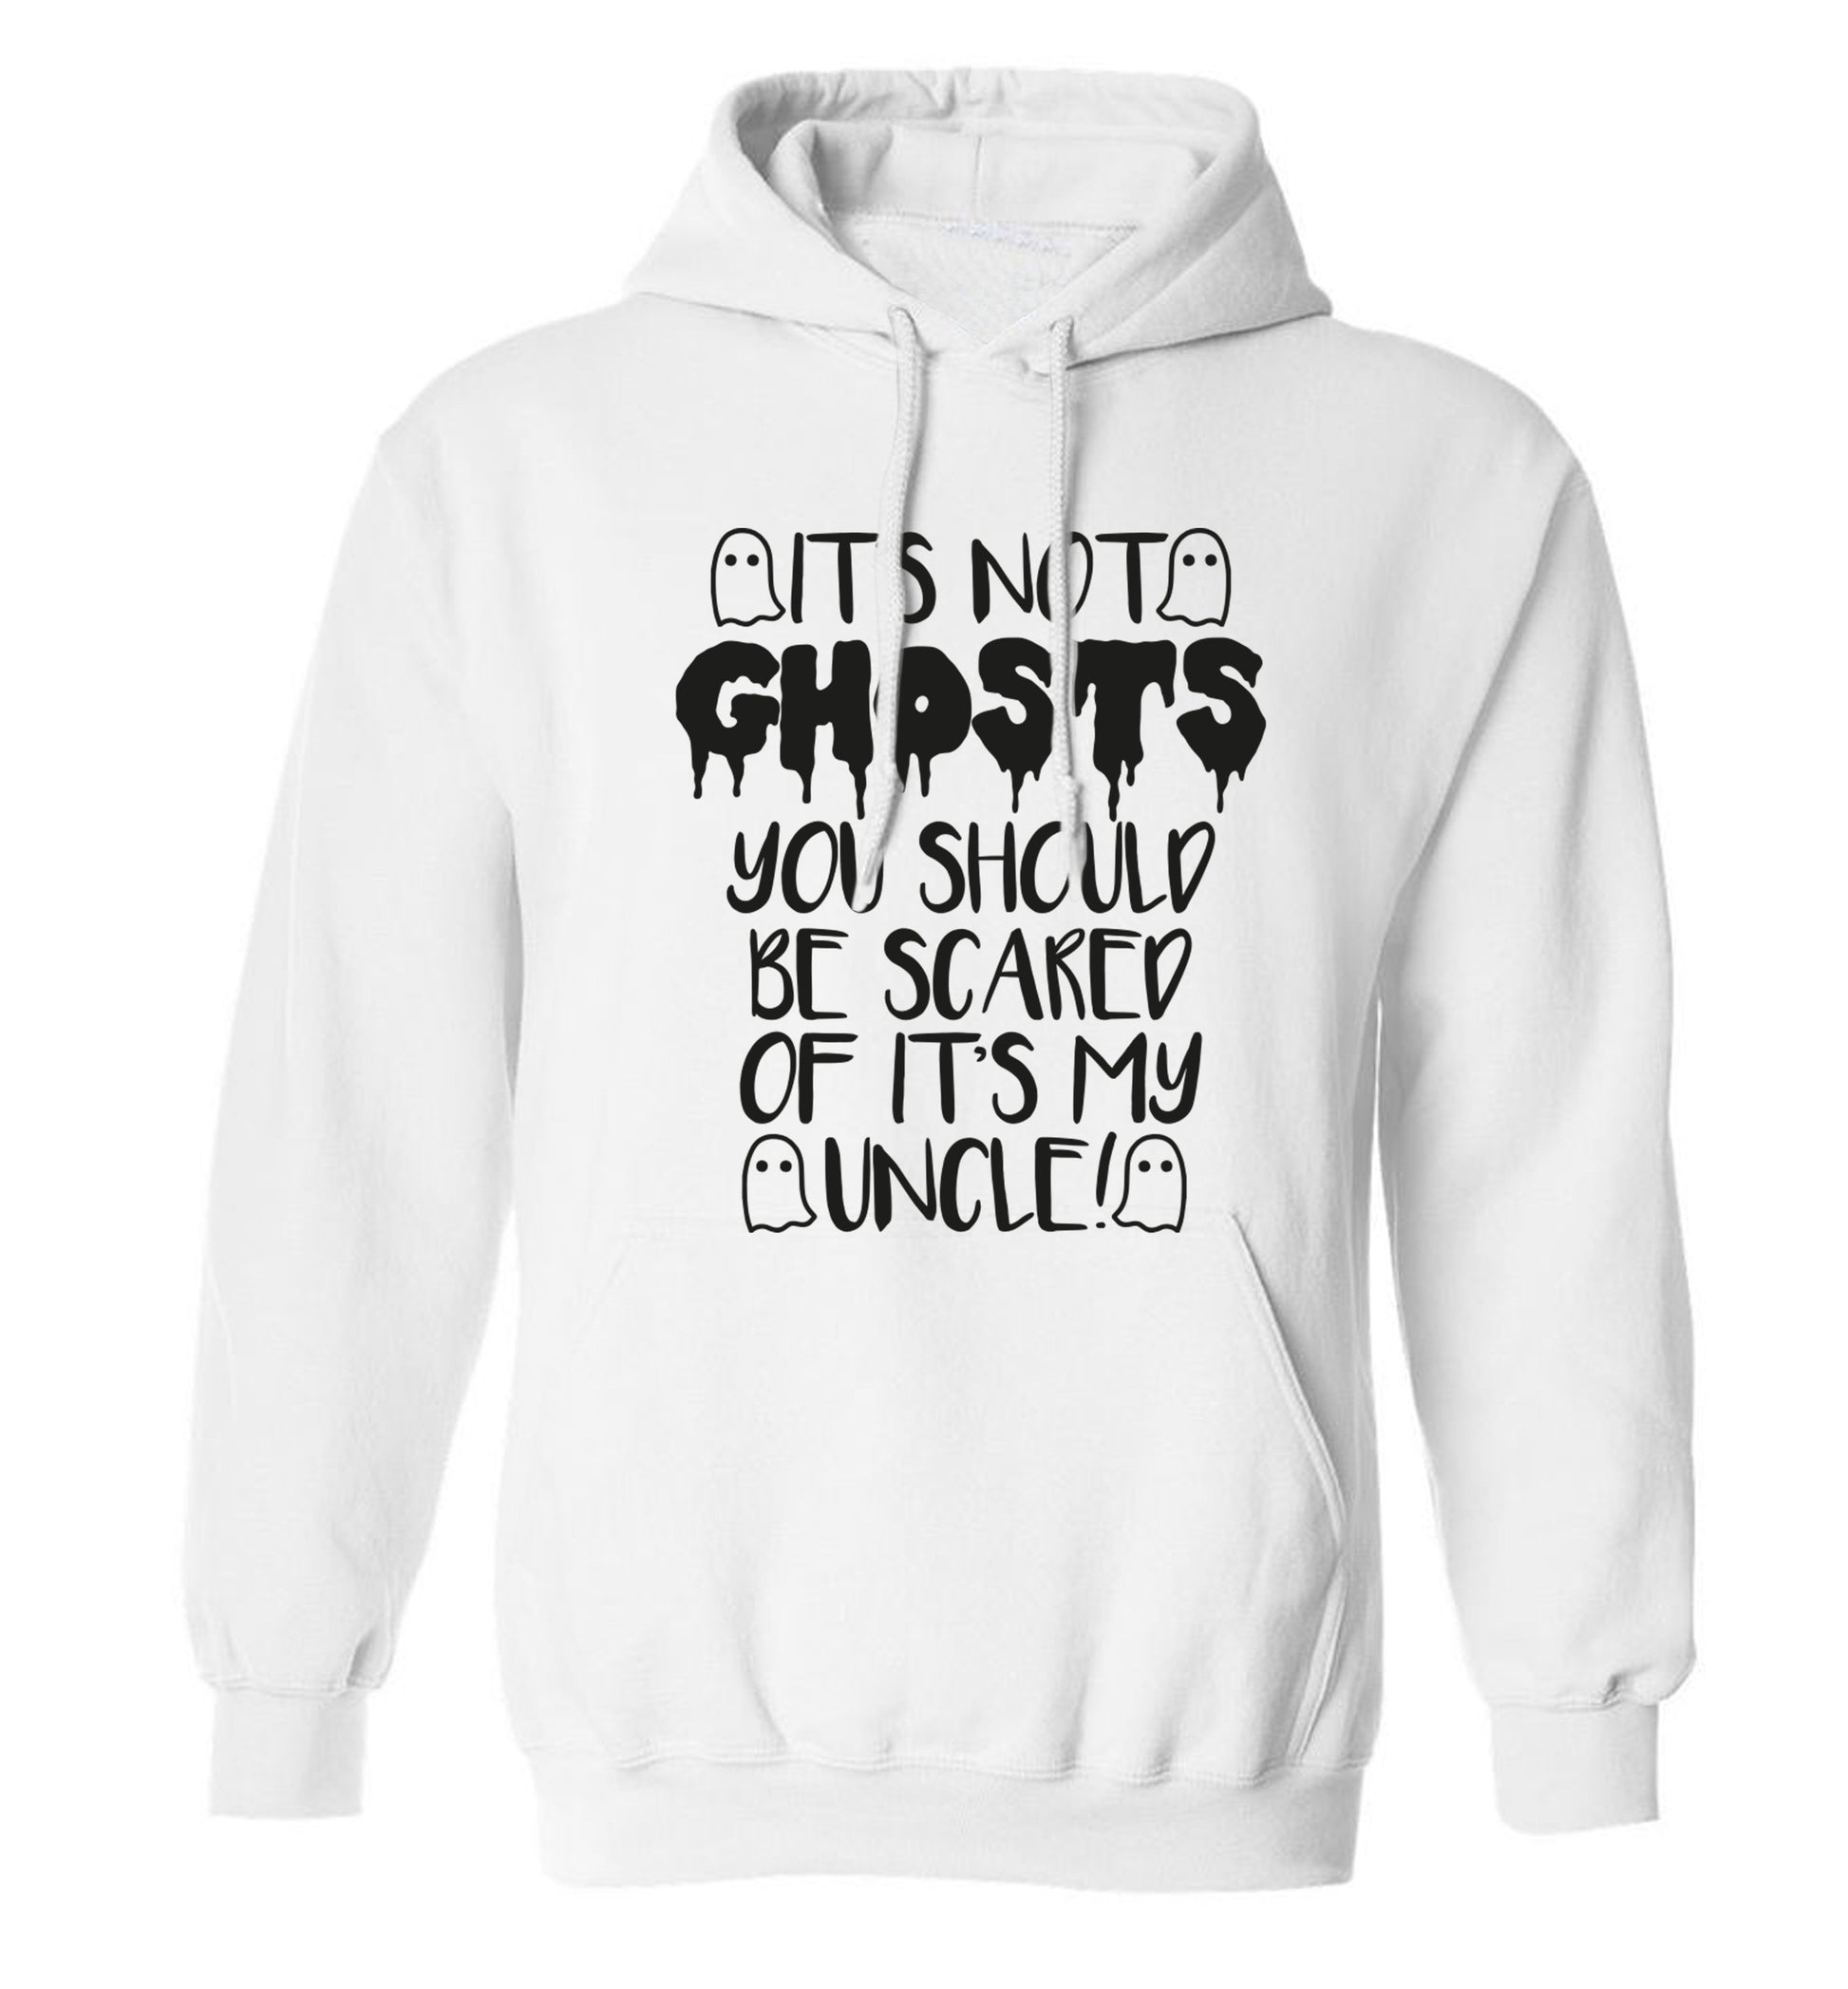 It's not ghosts you should be scared of it's my uncle! adults unisex white hoodie 2XL